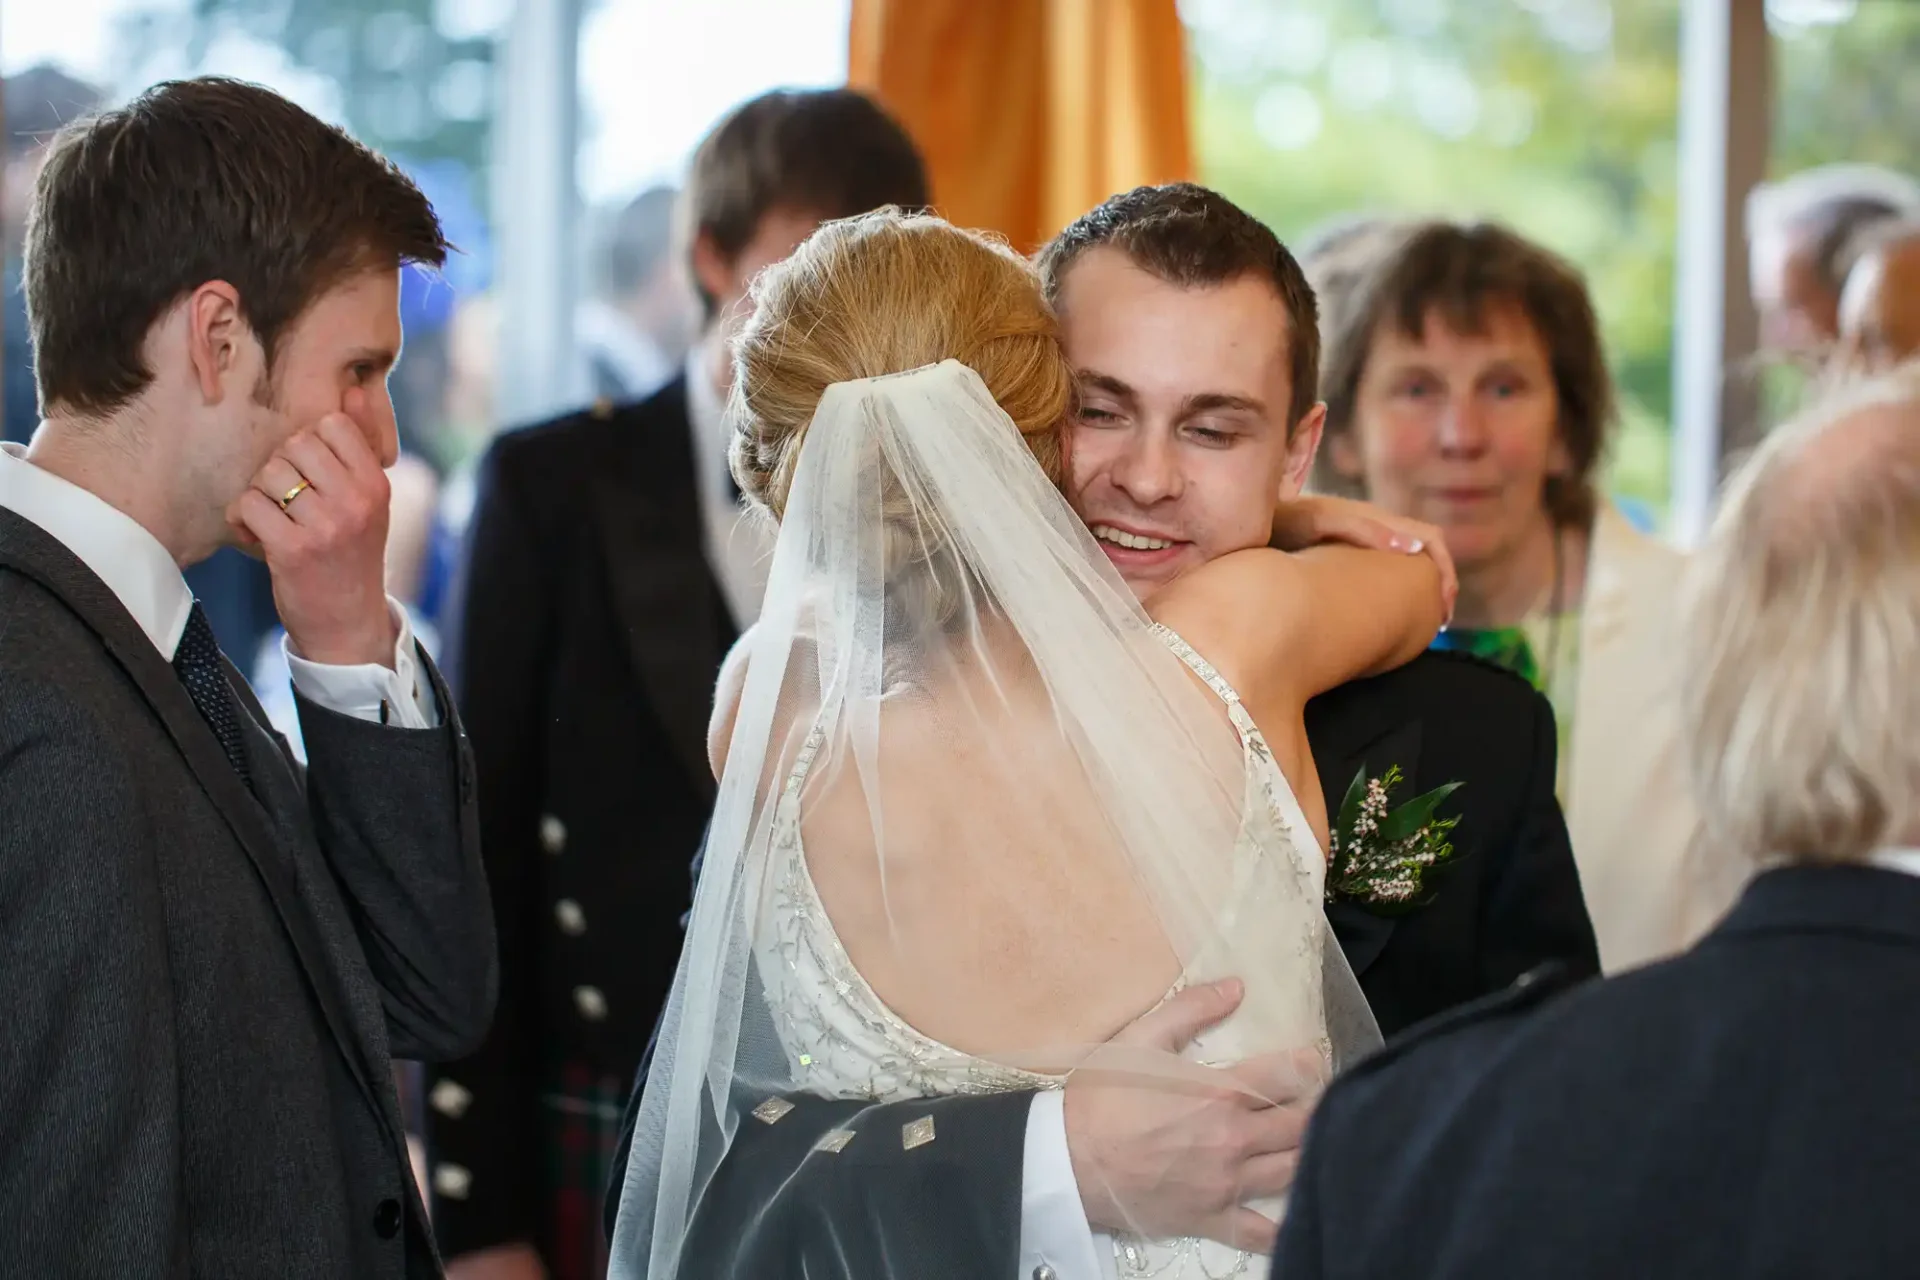 A groom hugs a bride wearing a veil at their wedding, surrounded by emotional guests.